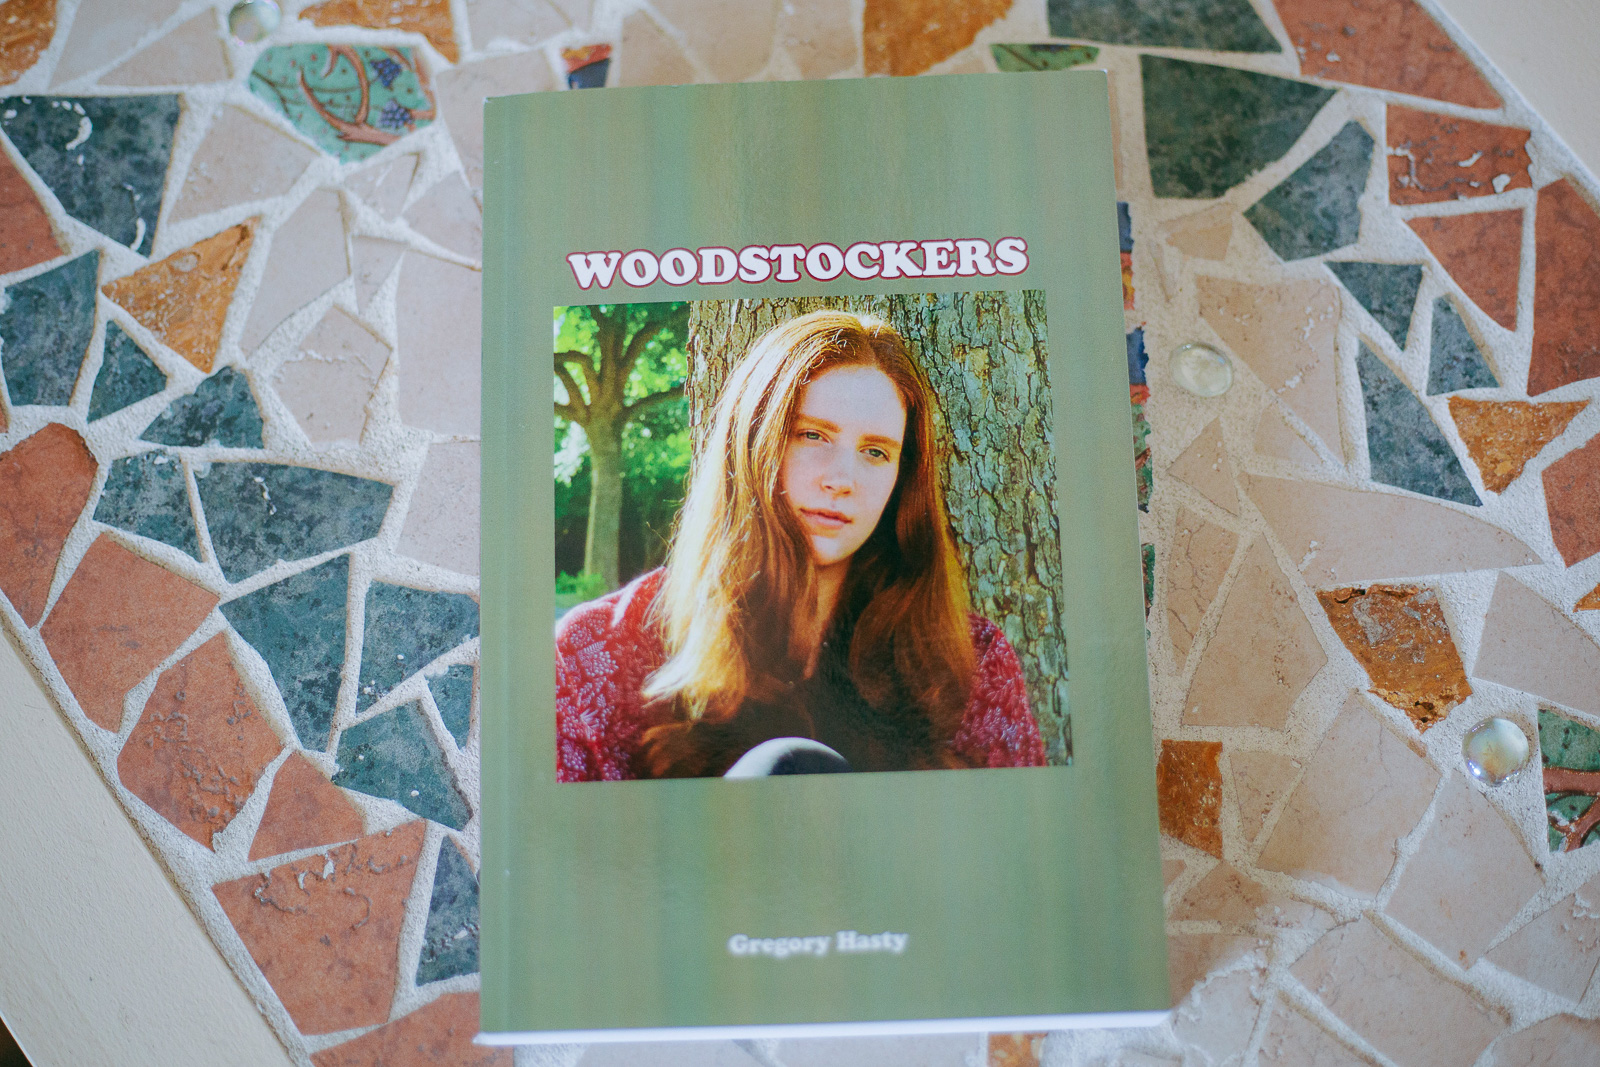 Greg Hasty's book Woodstokers. Photography Hunter Lacey